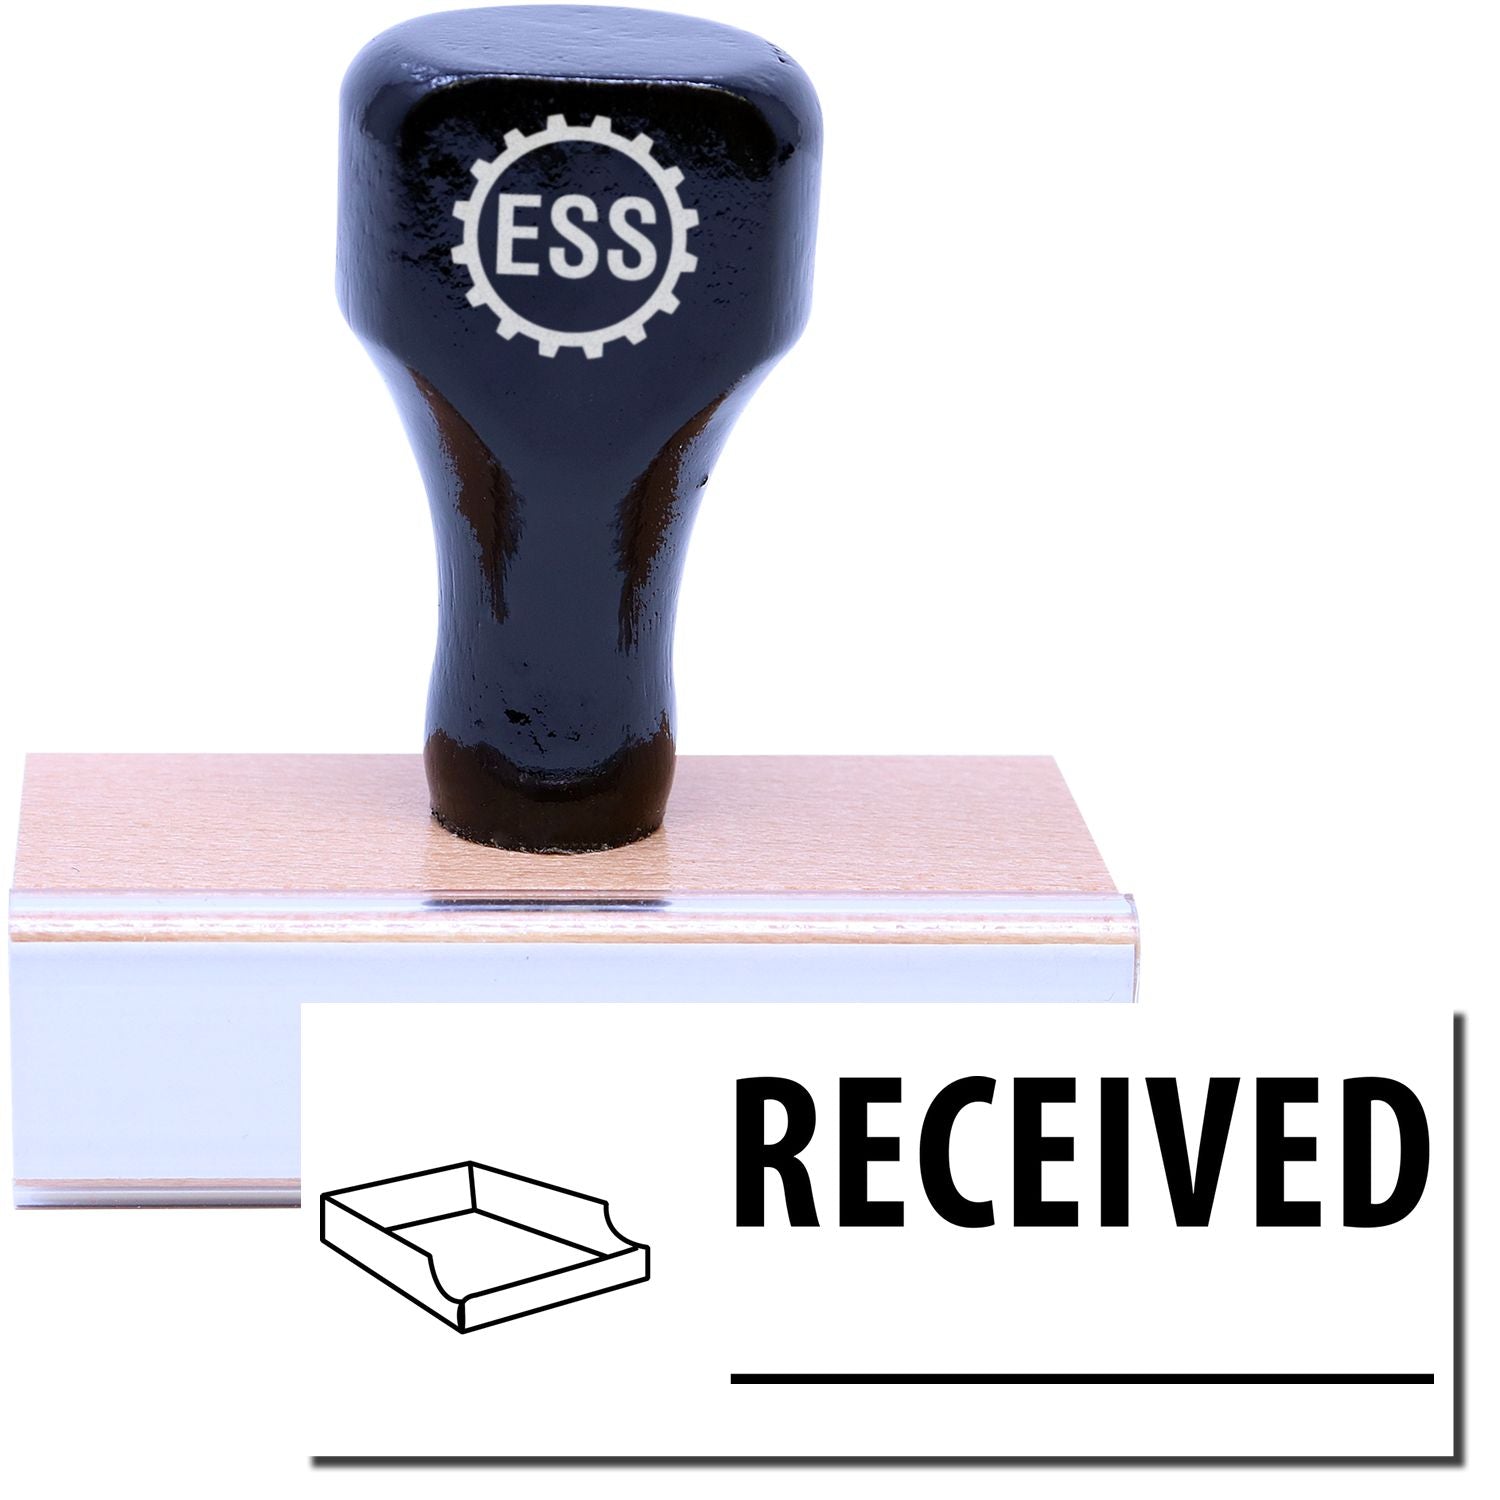 A stock office rubber stamp with a stamped image showing how the text "RECEIVED" with a line under the text and a box icon on the left side is displayed after stamping.